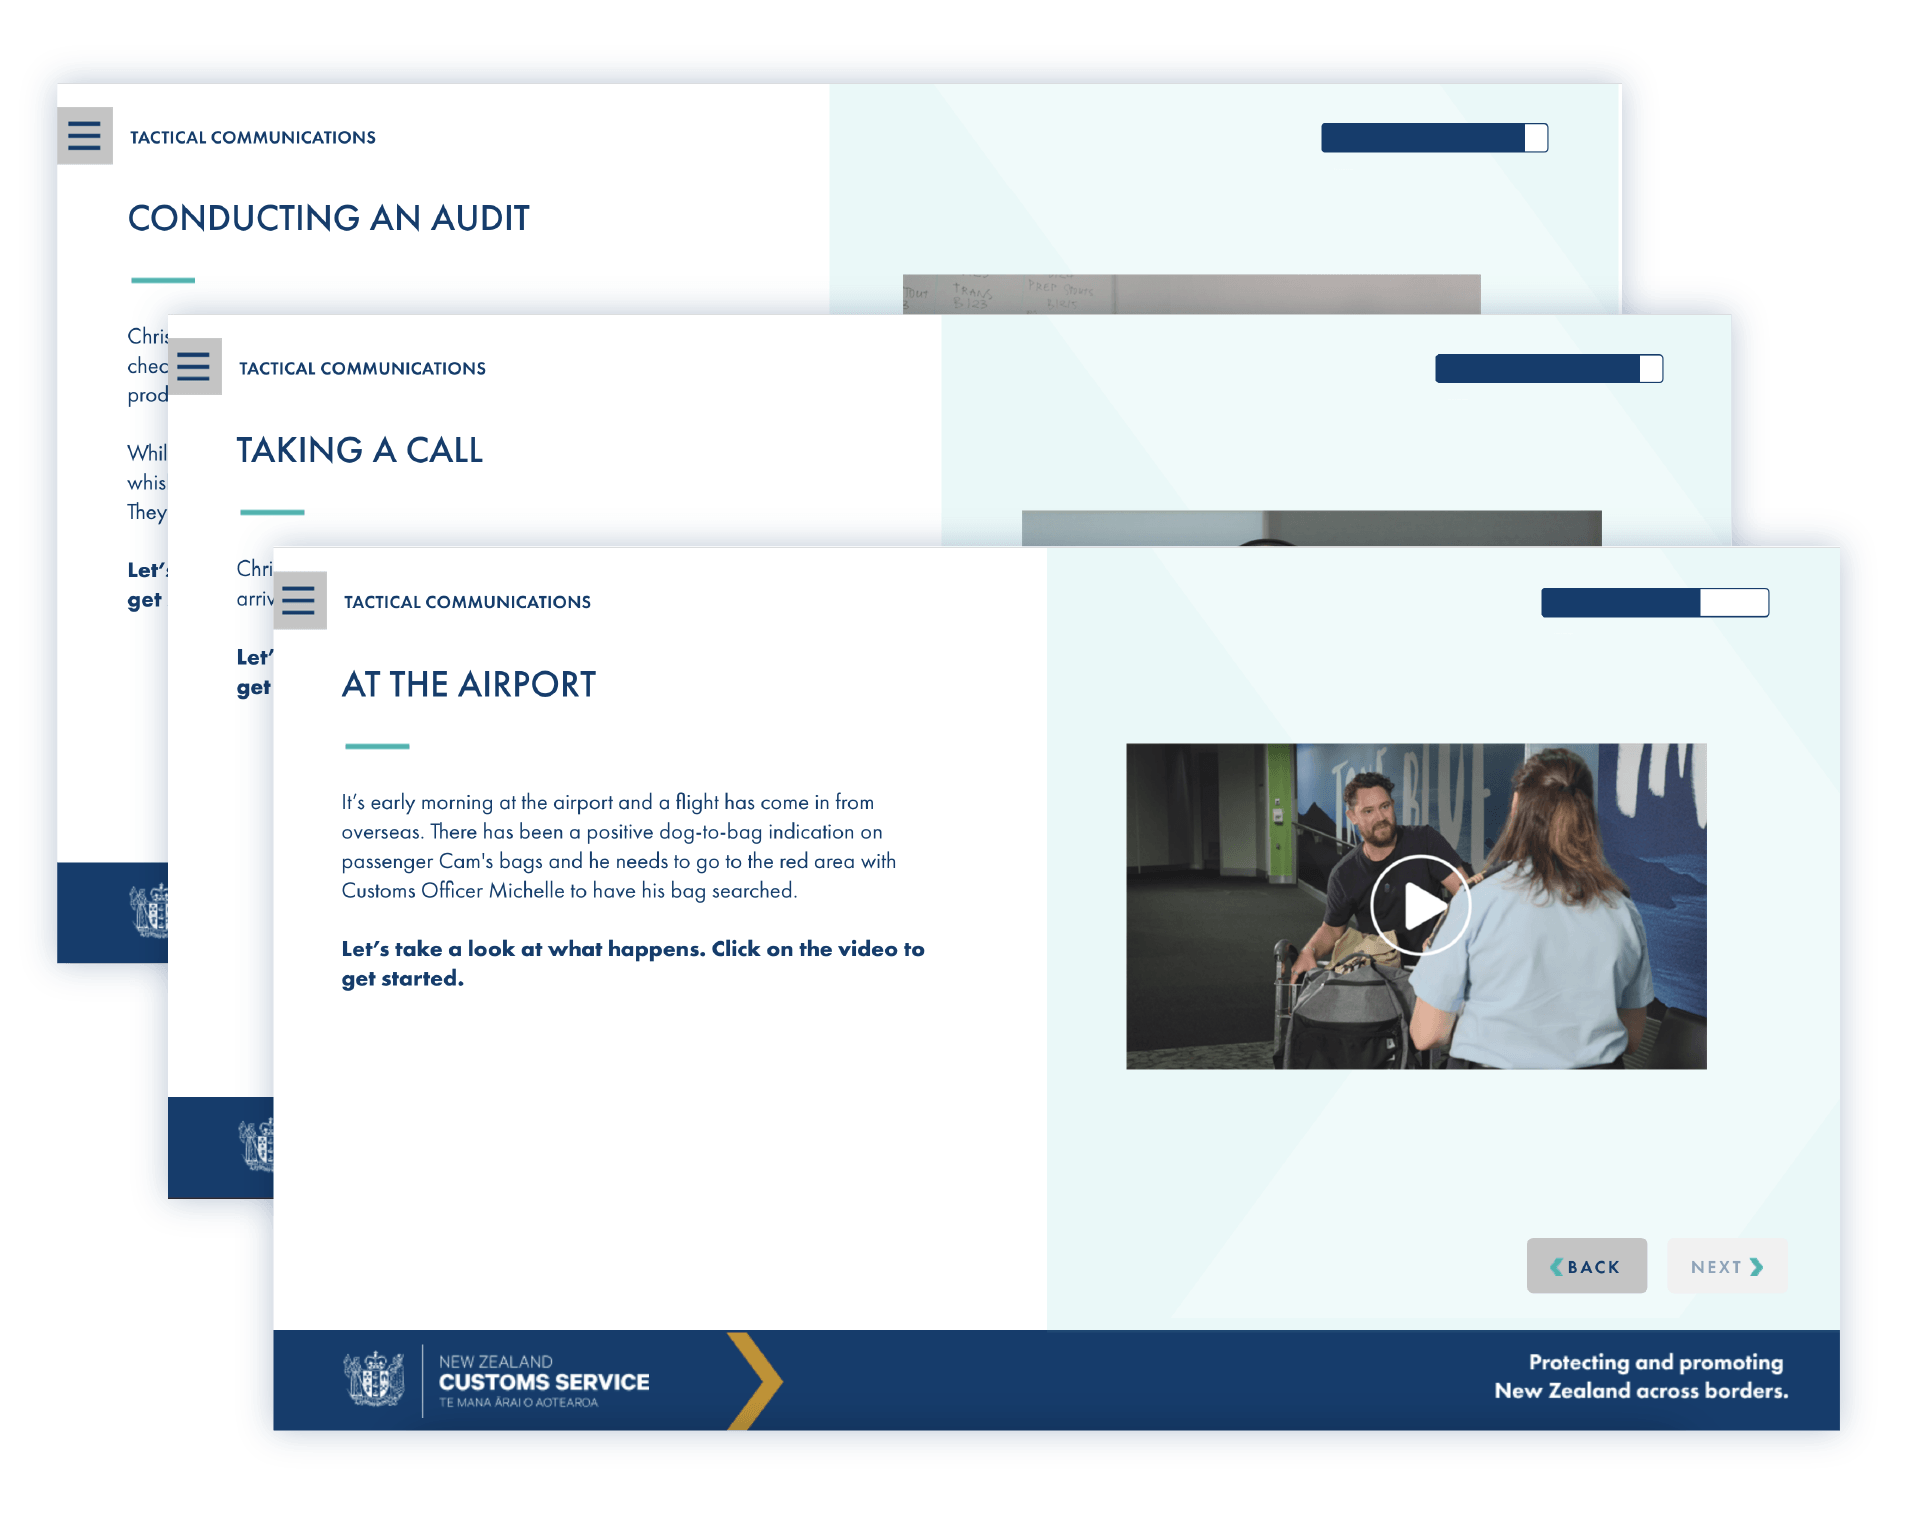 Screenshots of eLearning module pages with videos showing different scenarios